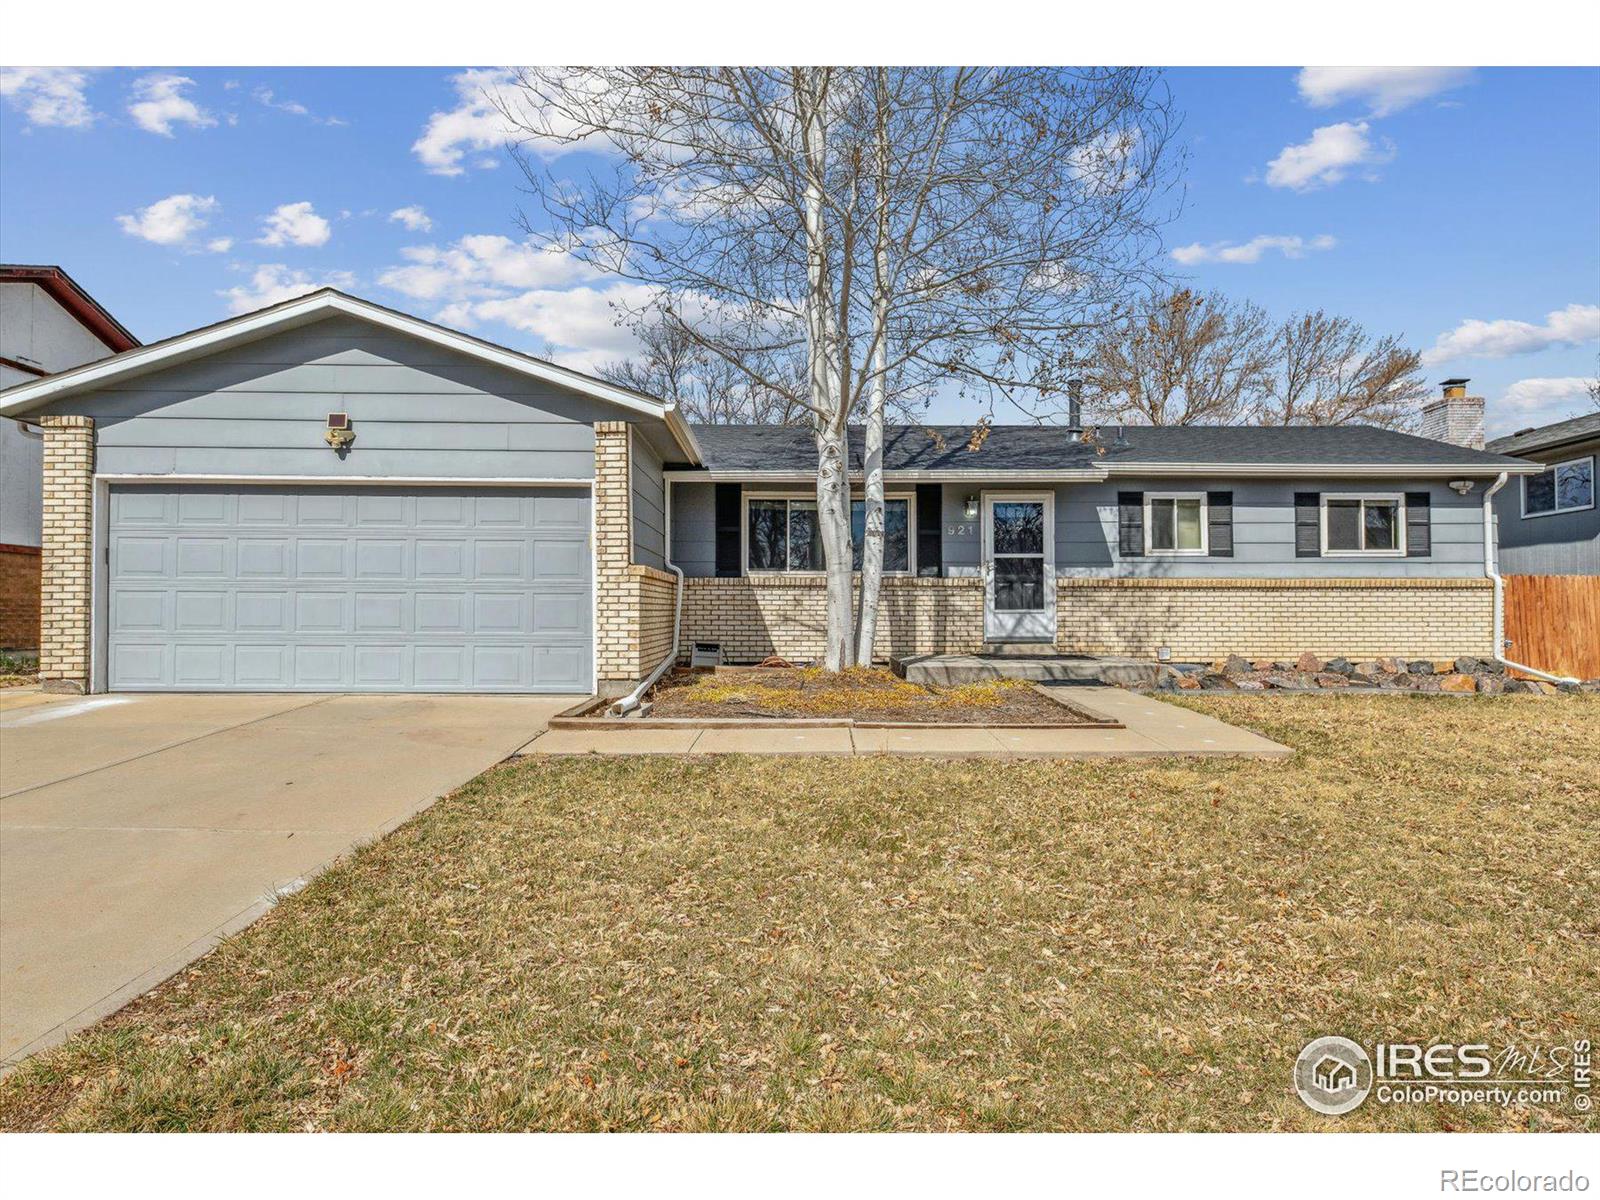 921 E Midway Boulevard, broomfield MLS: 4567891005146 Beds: 3 Baths: 2 Price: $525,000